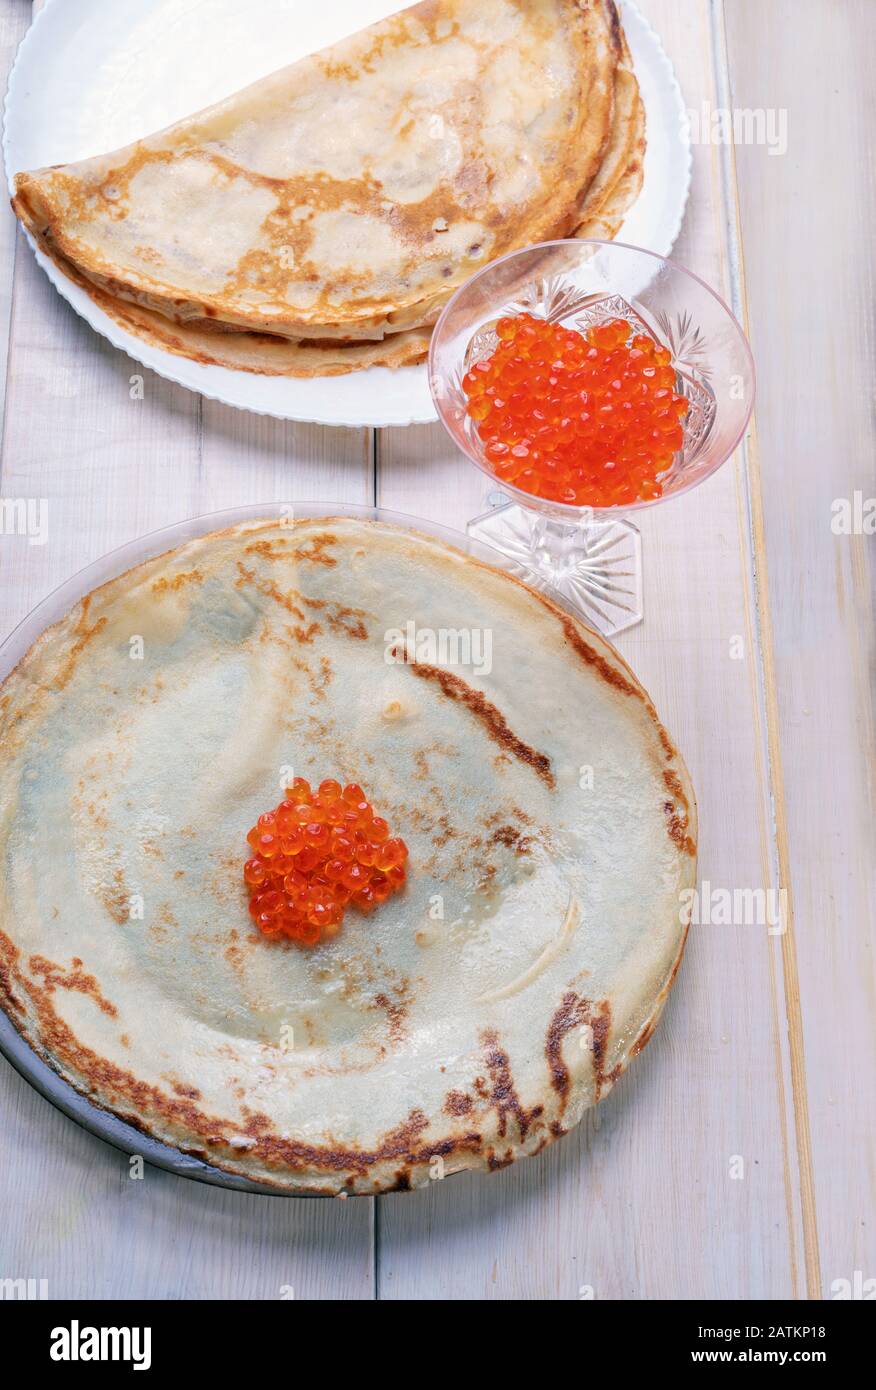 Pancakes with fish roe   of chum salmon  as filling - on white surface Stock Photo